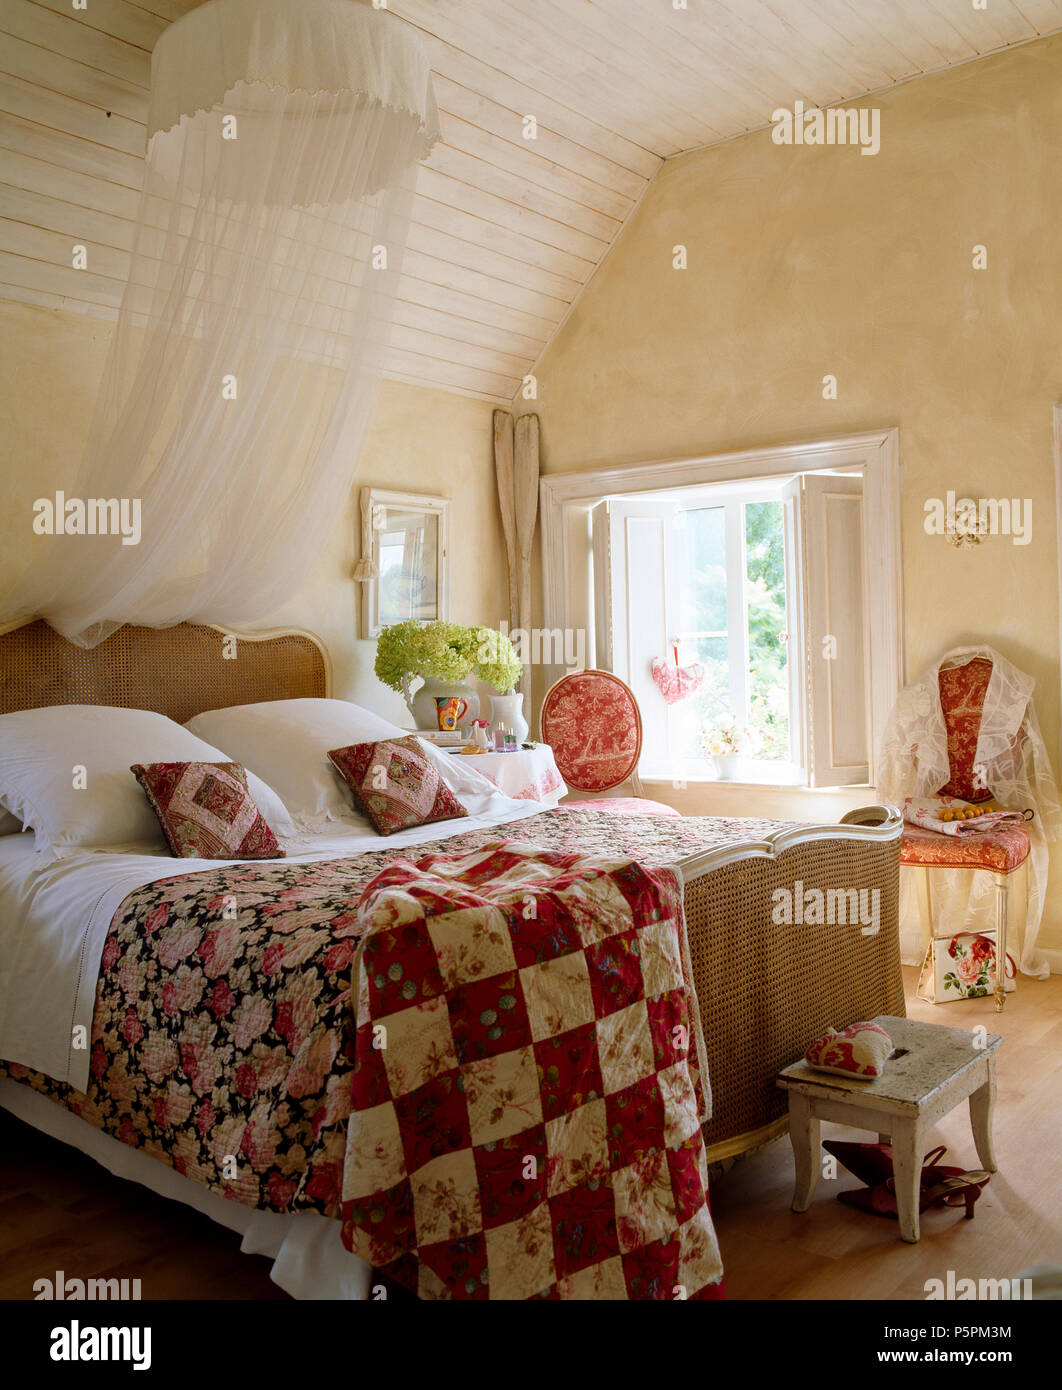 Country bedroom white voile mosquito net above antique Bergere bed with red+white patchwork and rose-patterned quilts Stock Photo